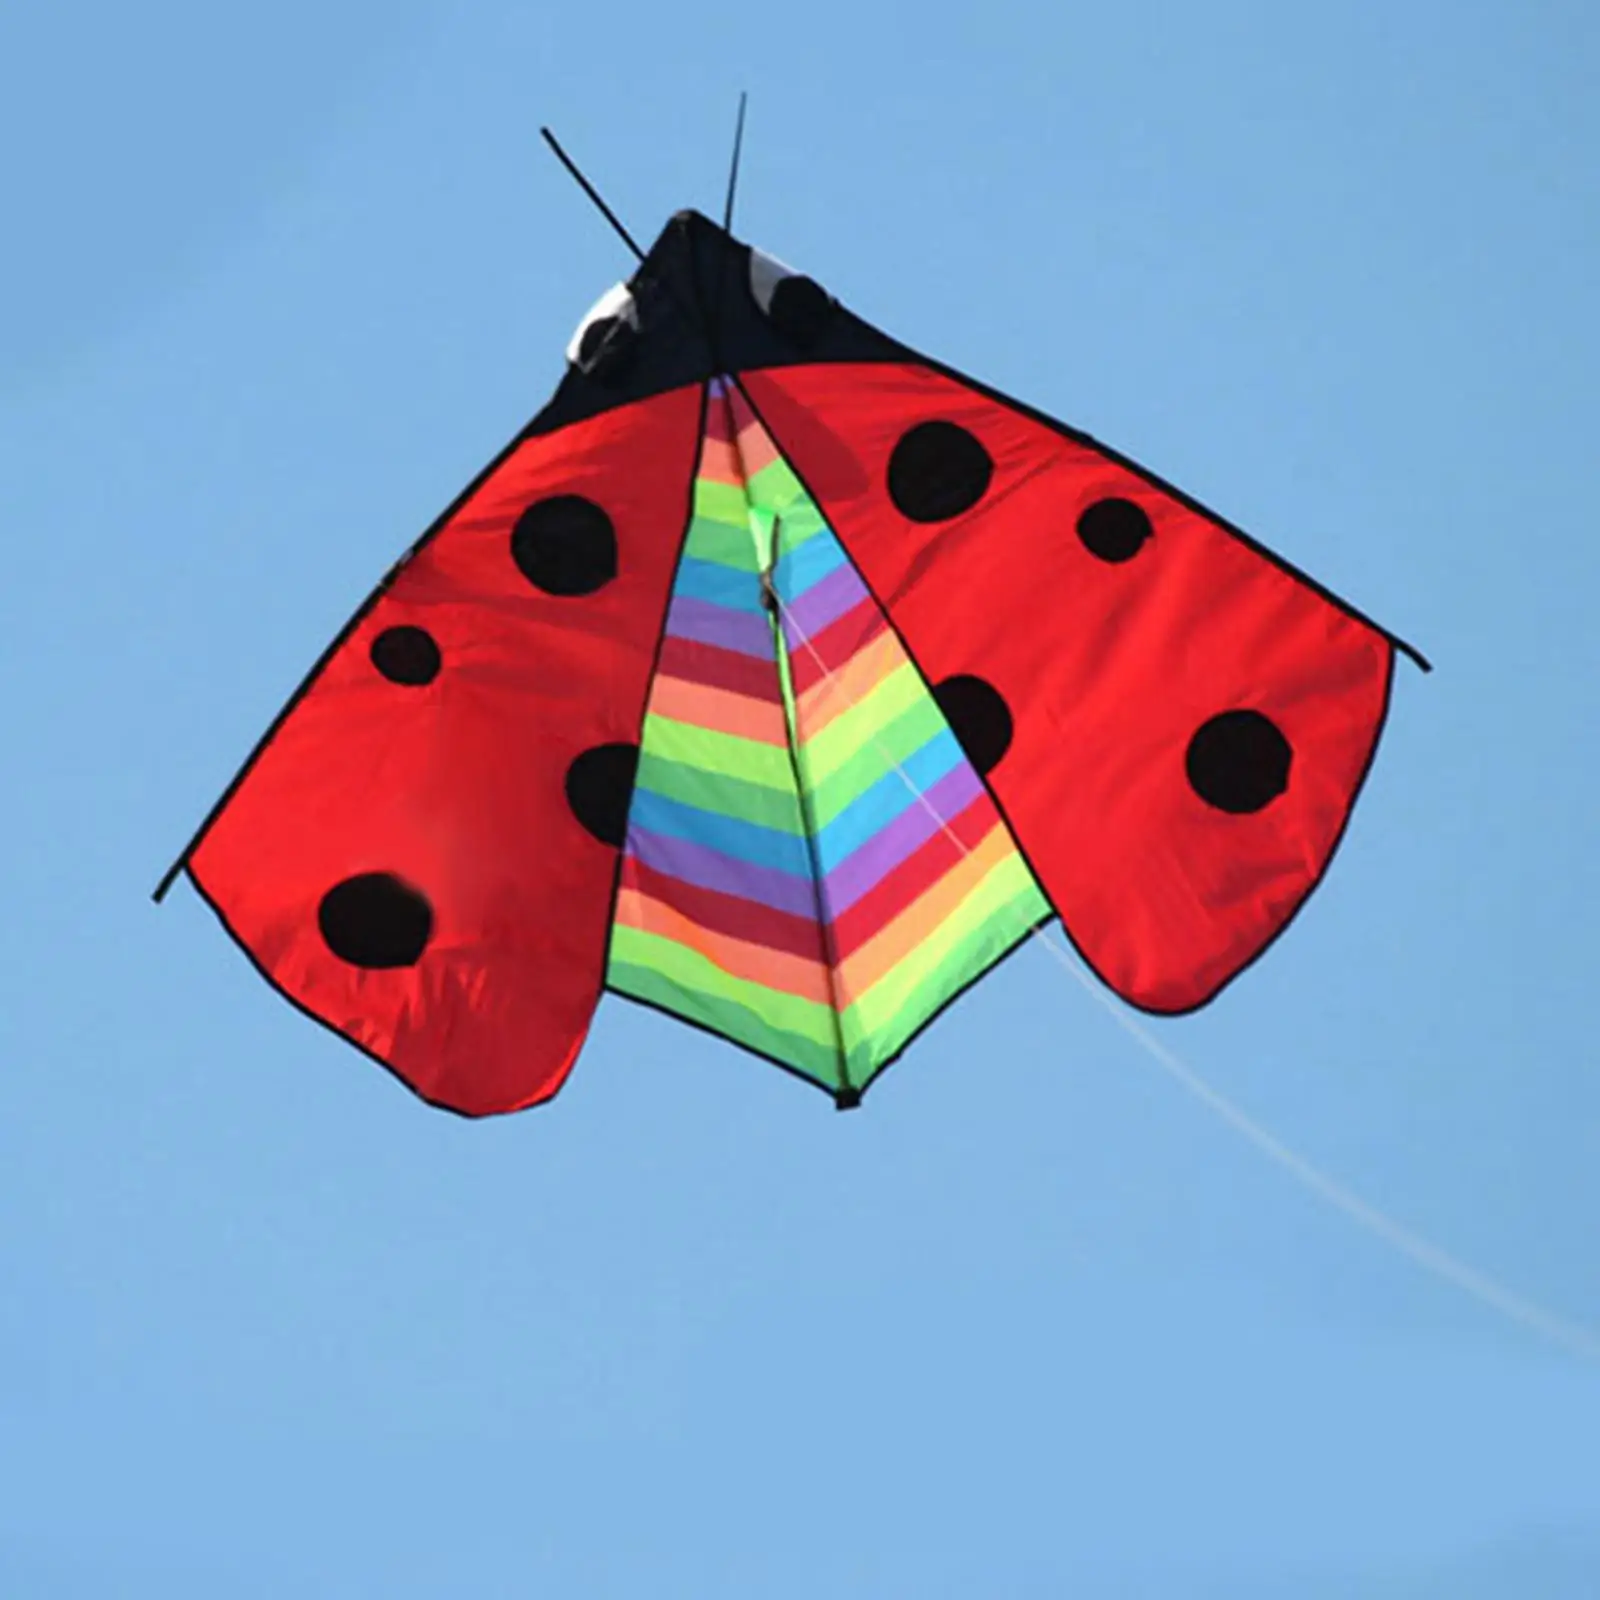 Large Delta Kite Fly Kite Fun Toy Windsock Huge  Vivid Triangle Ladybug Kite for Park Beach Sports  Trips